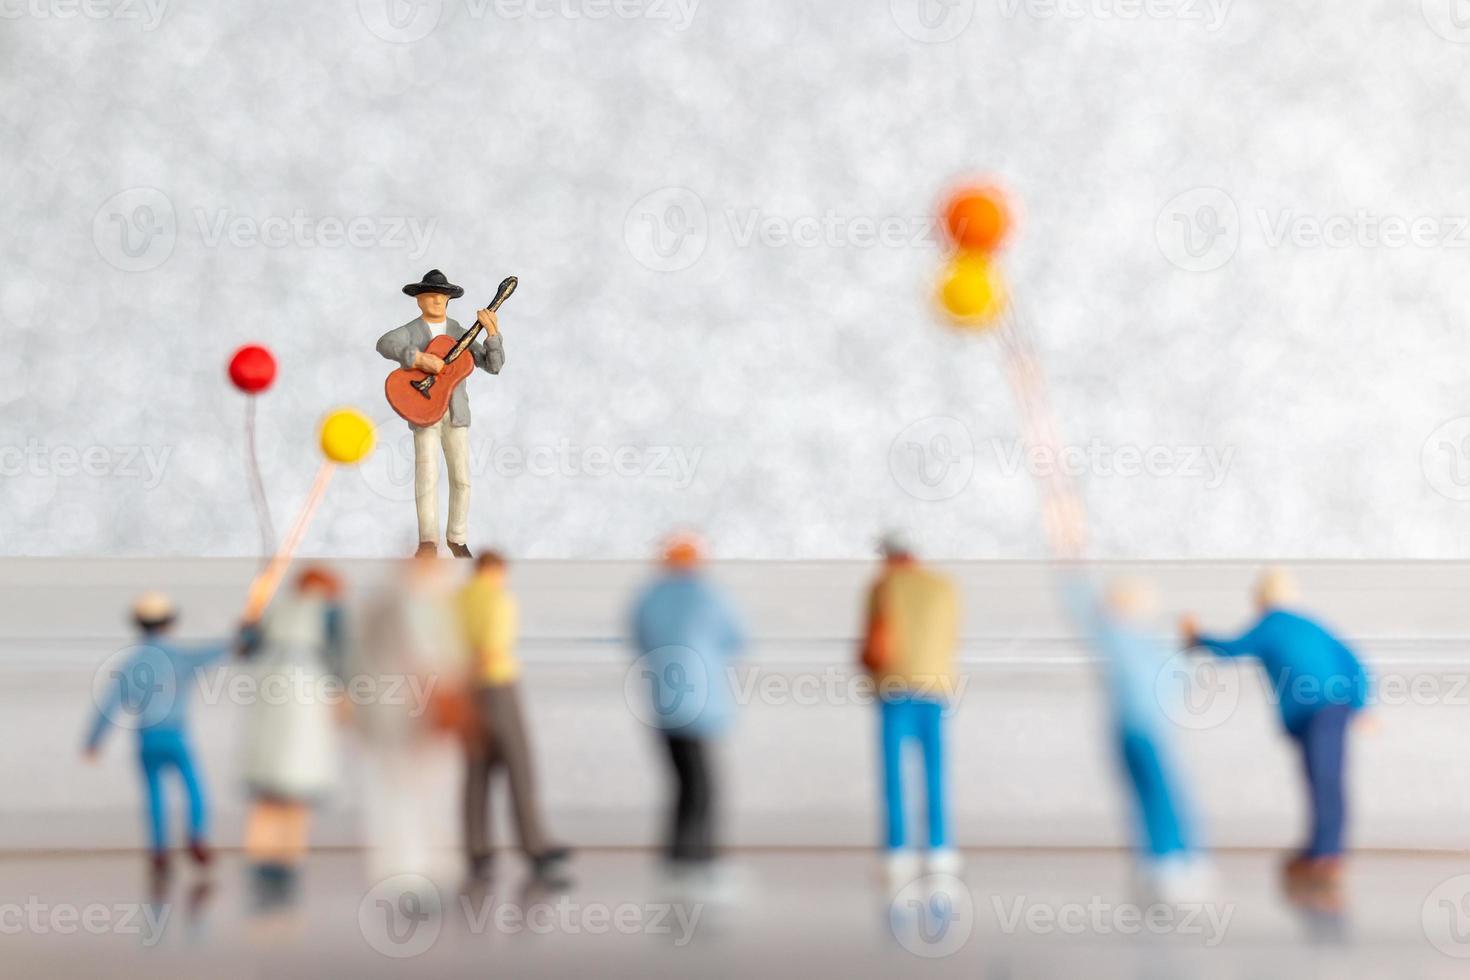 Miniature Musician playing a guitar on stage, World music day concept photo